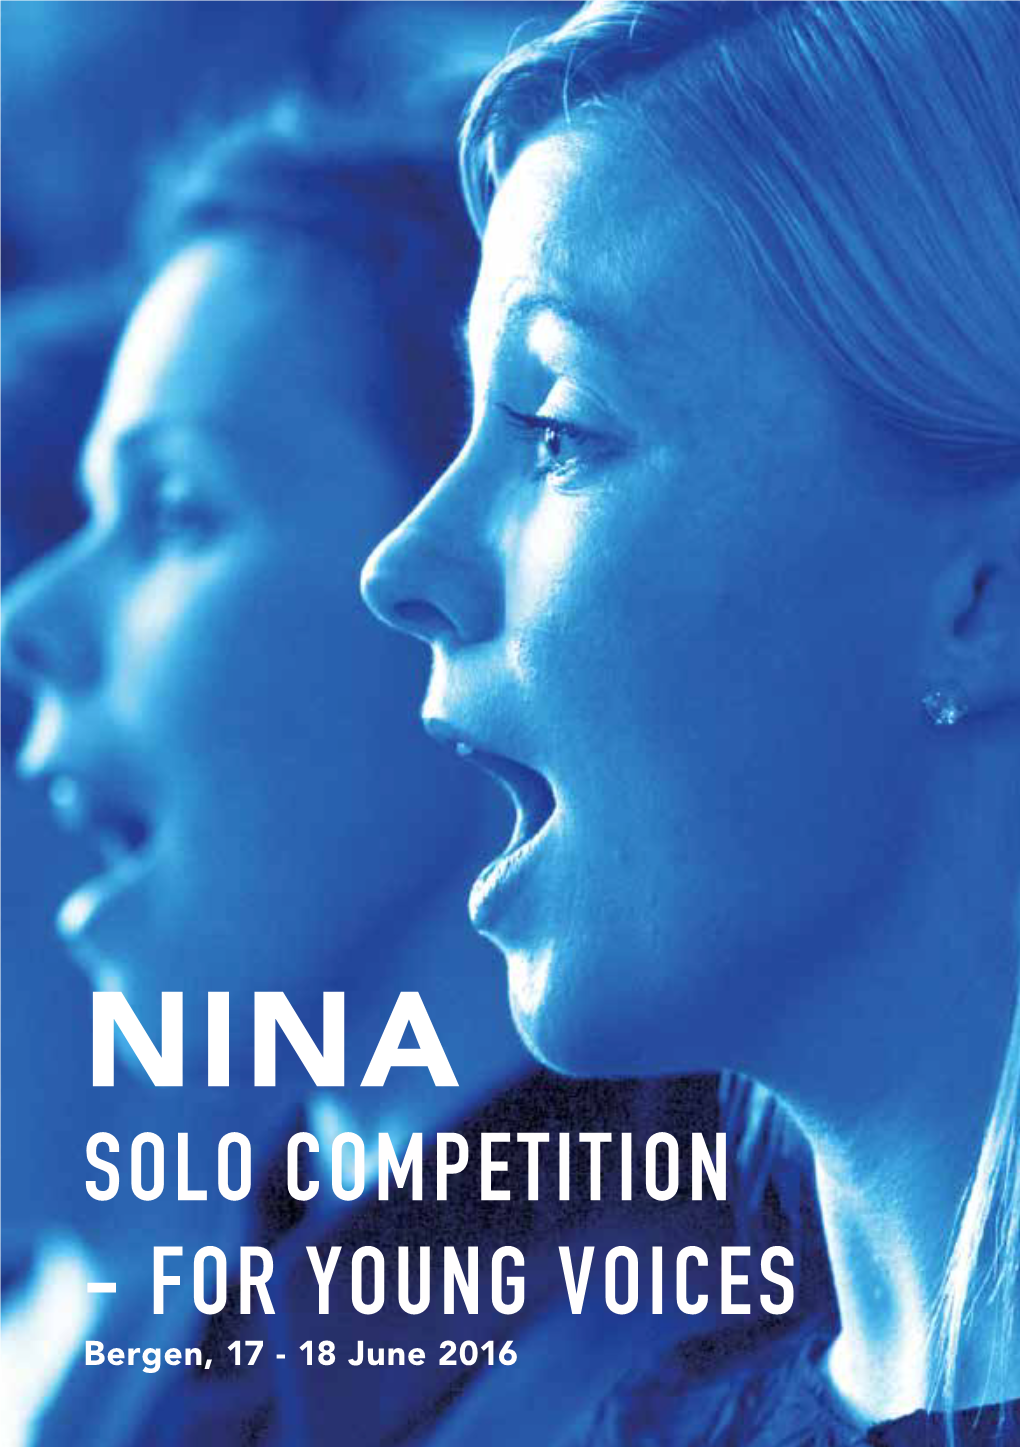 SOLO COMPETITION - for YOUNG VOICES Bergen, 17 - 18 June 2016 1 2 WELCOME to the 3